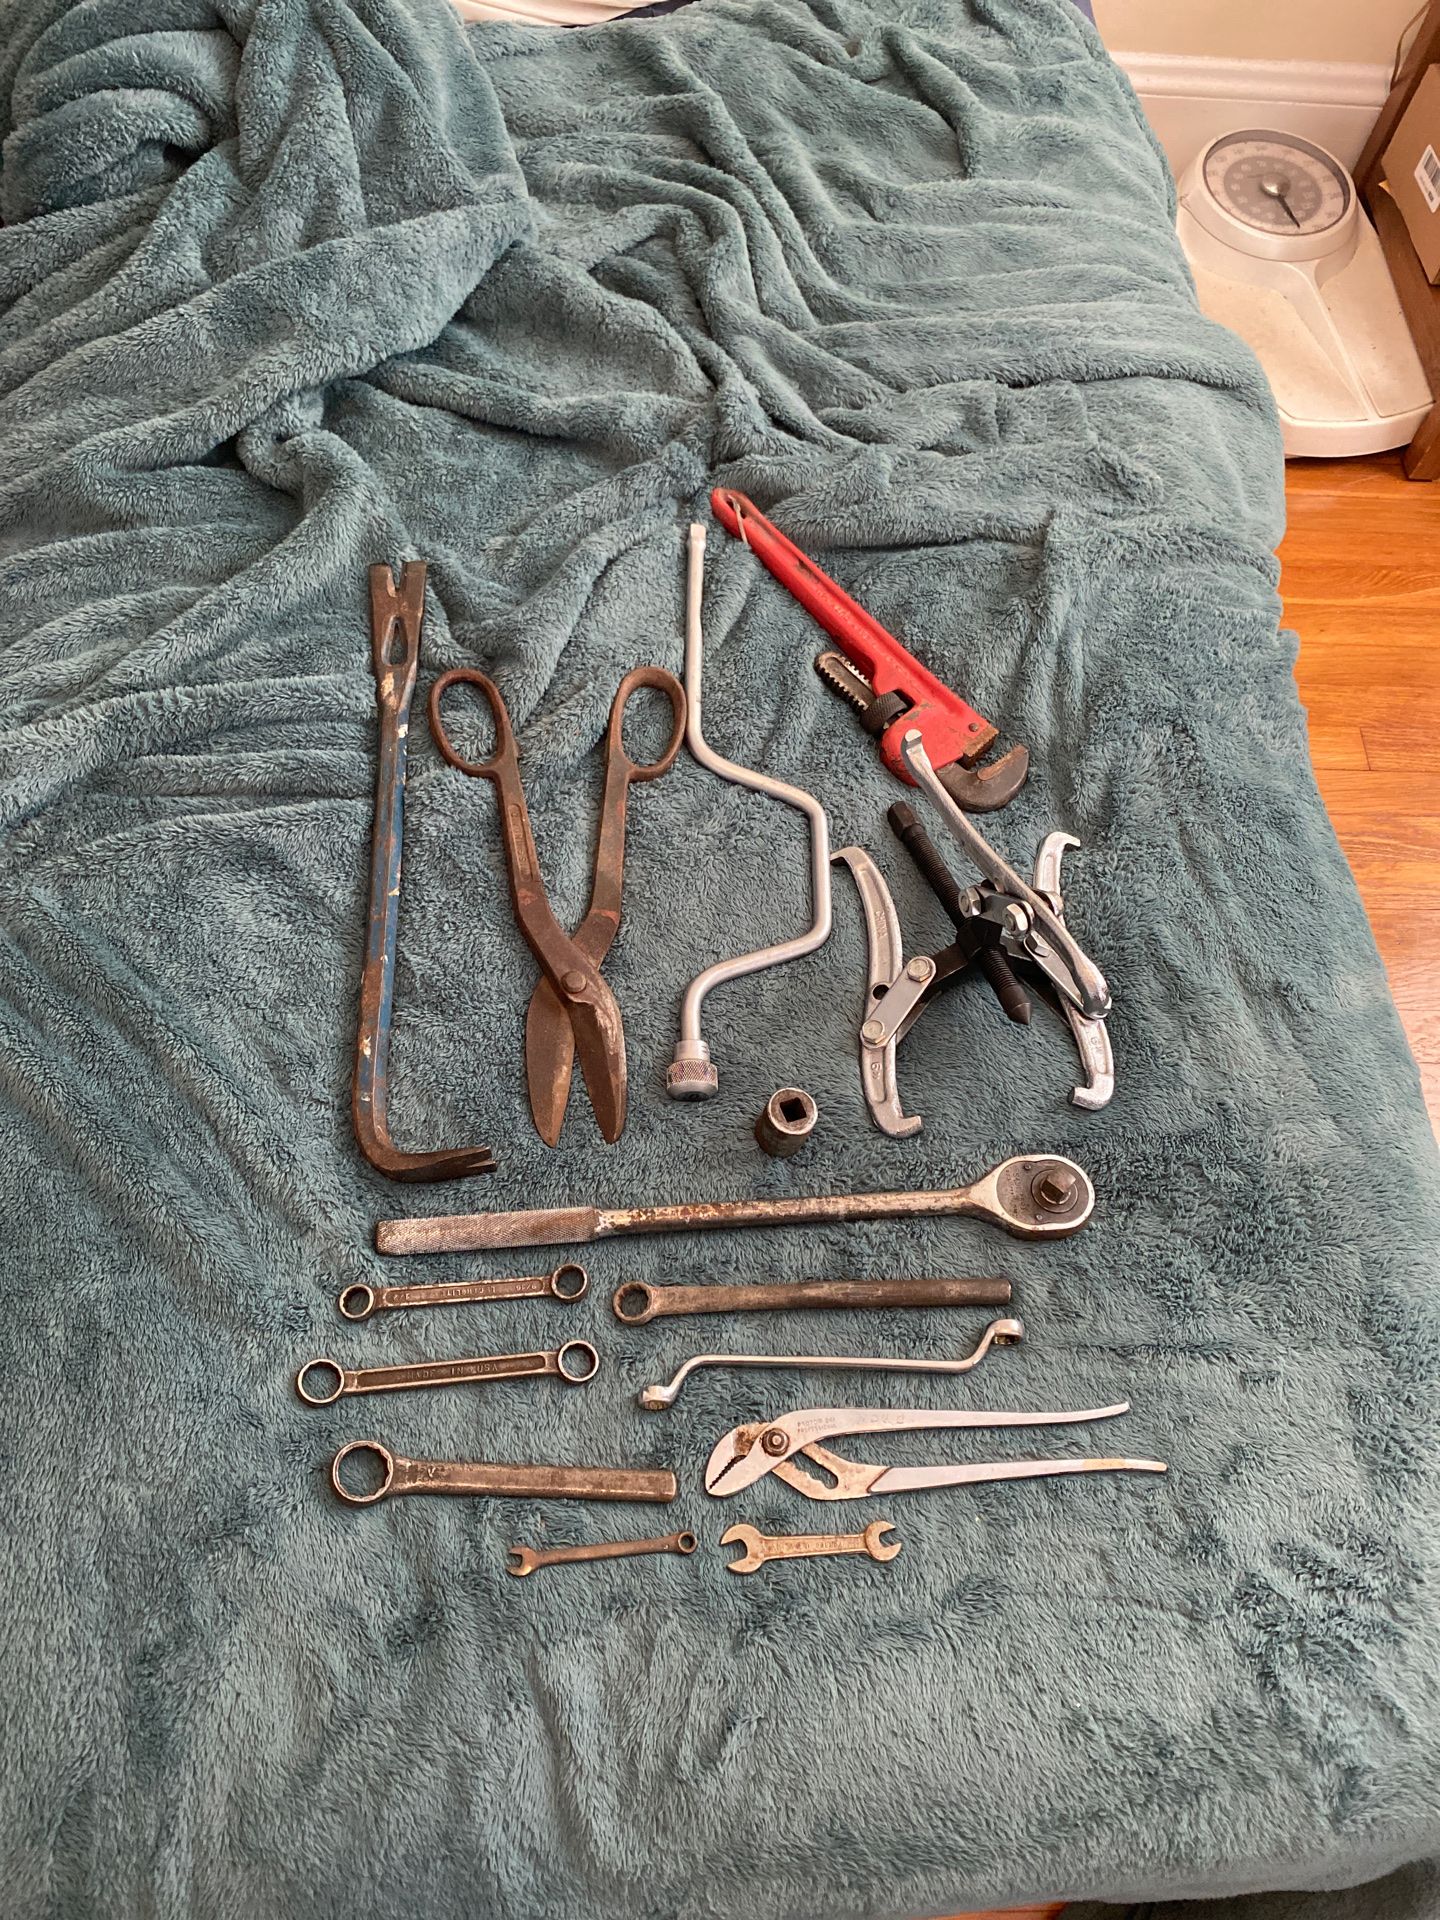 Miscellaneous lot of tools Proto snap on etc.